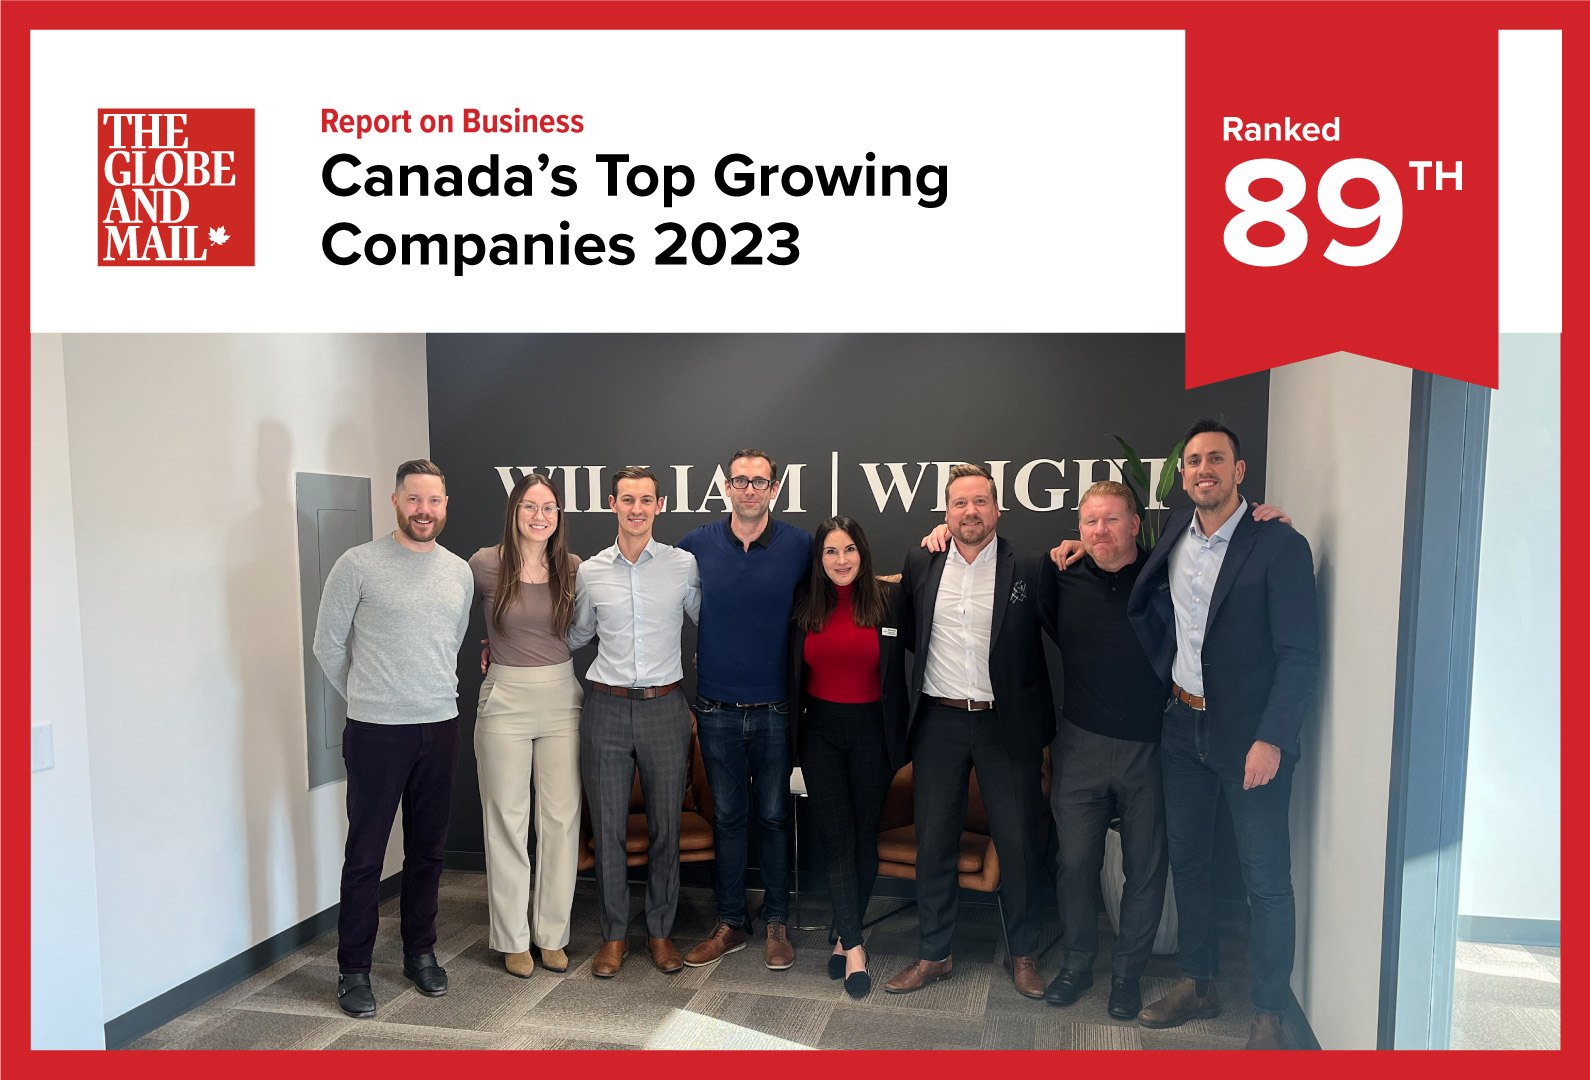 William Wright Commercial named the 89th top growing company by The Globe and Mail for 2023